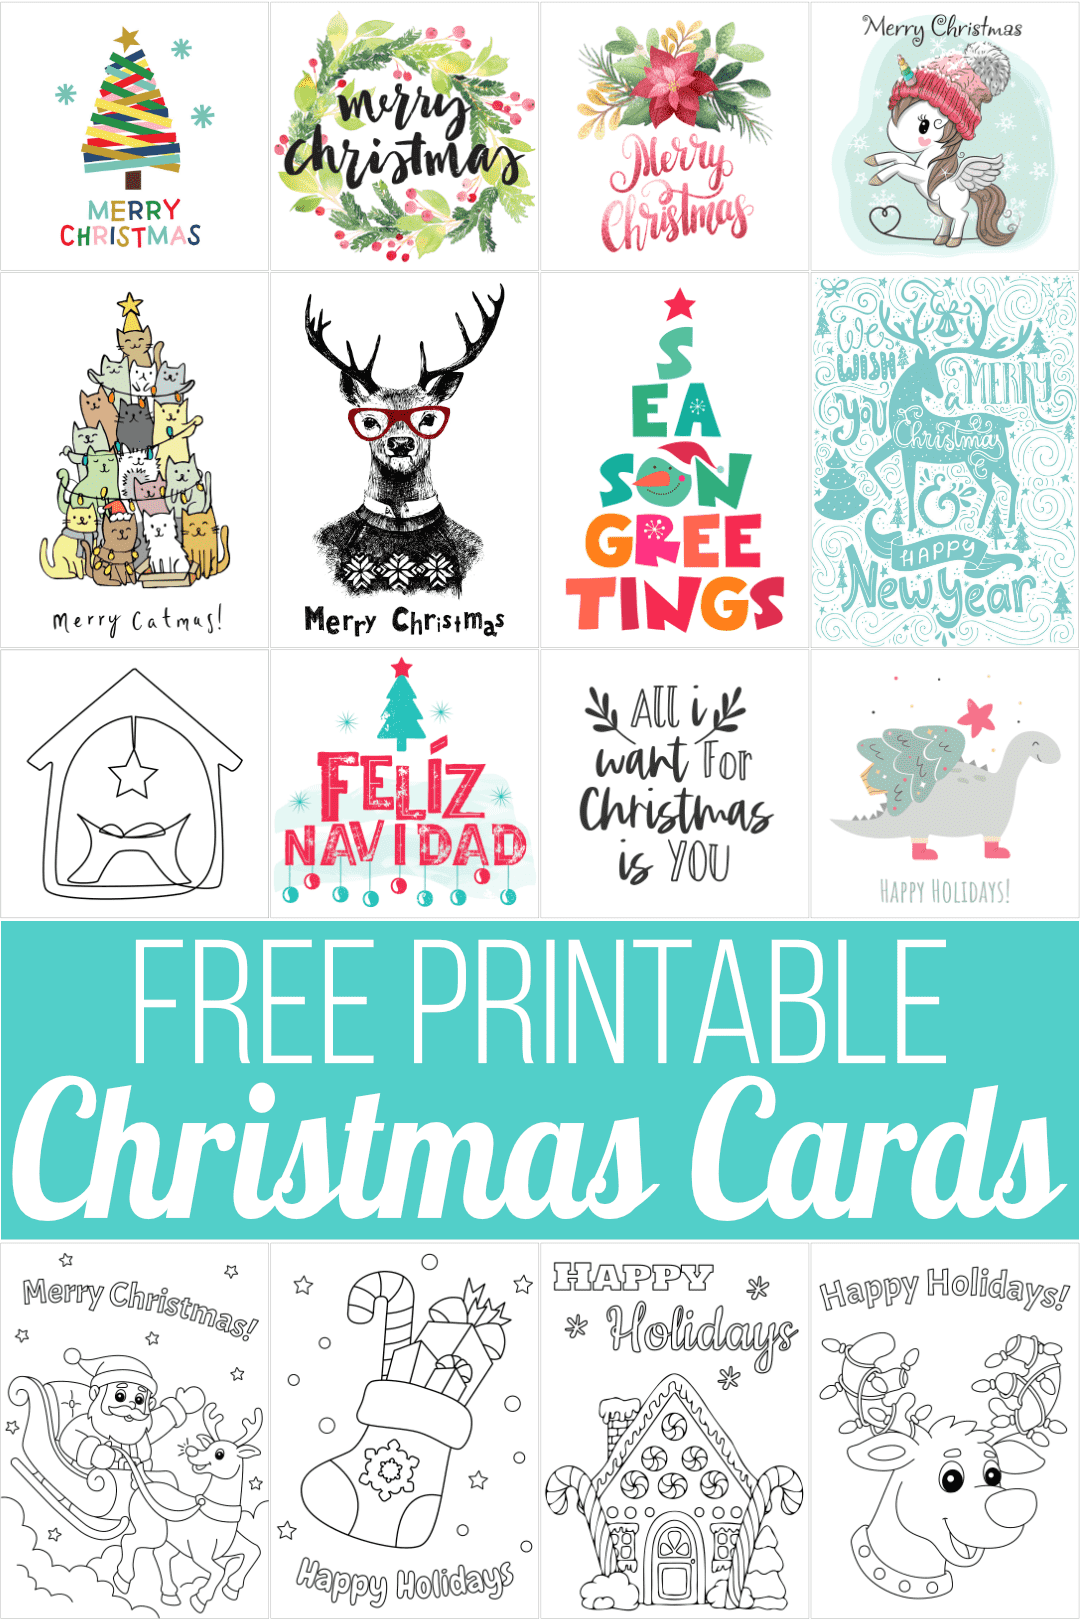 22 Free Printable Christmas Cards for 22 With Free Templates For Cards Print